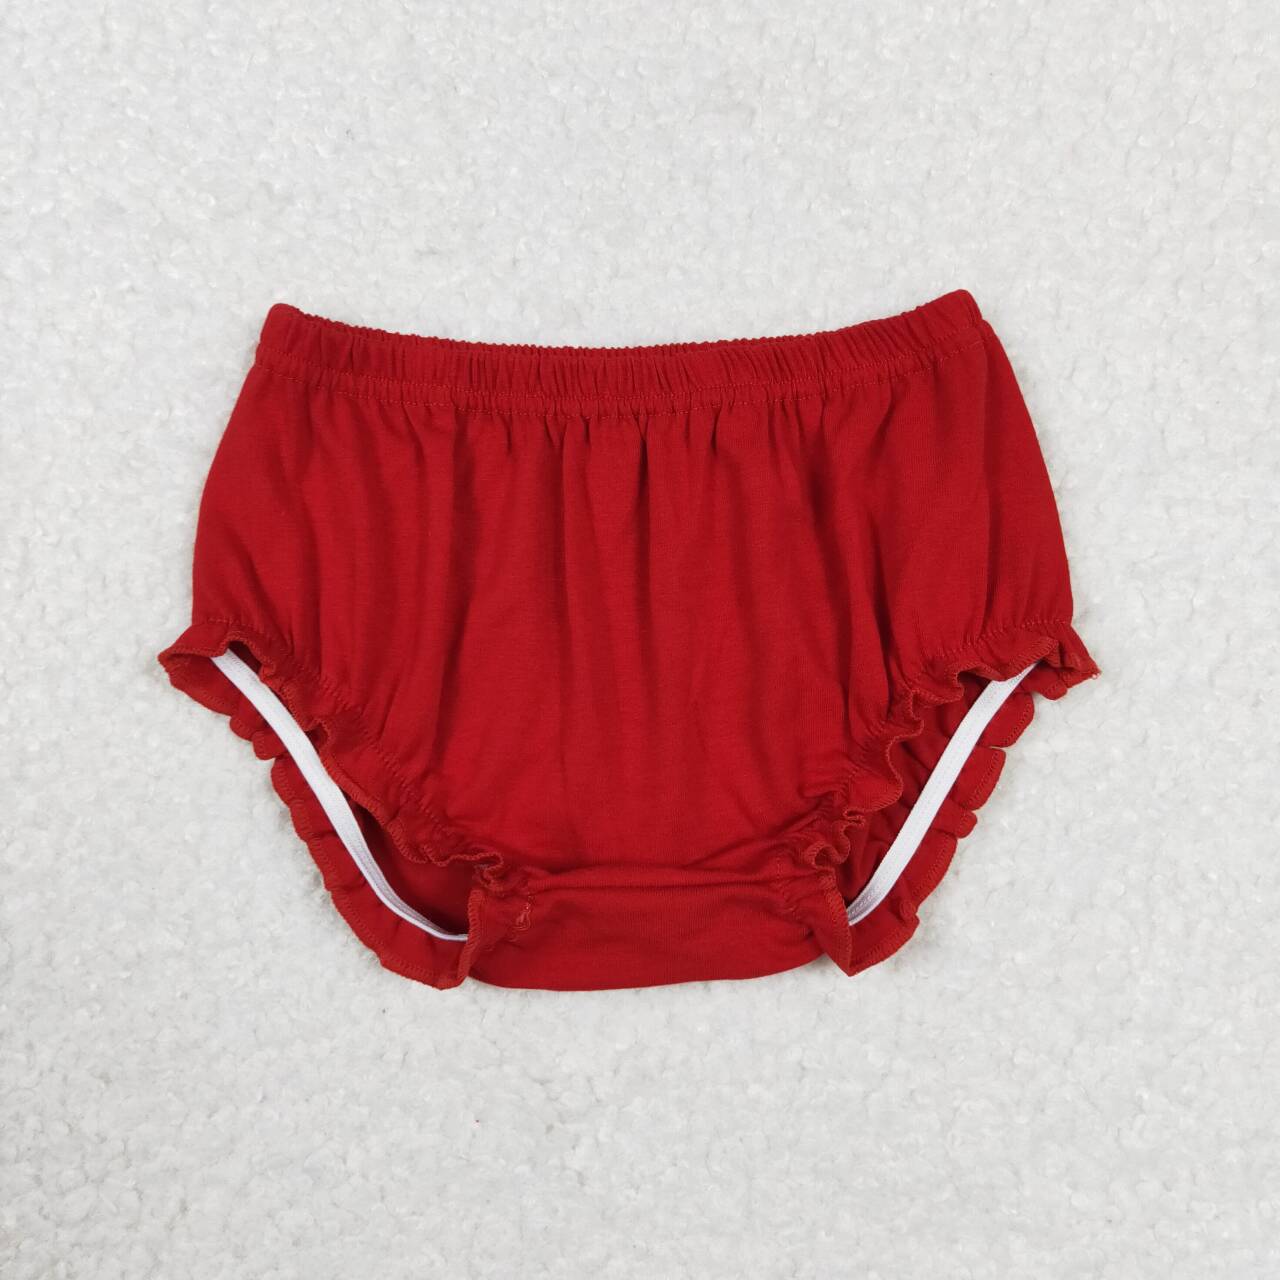 GBO0354 Baseball Embroidery Top Red Shorts Baby Girls Summer Bummie Set